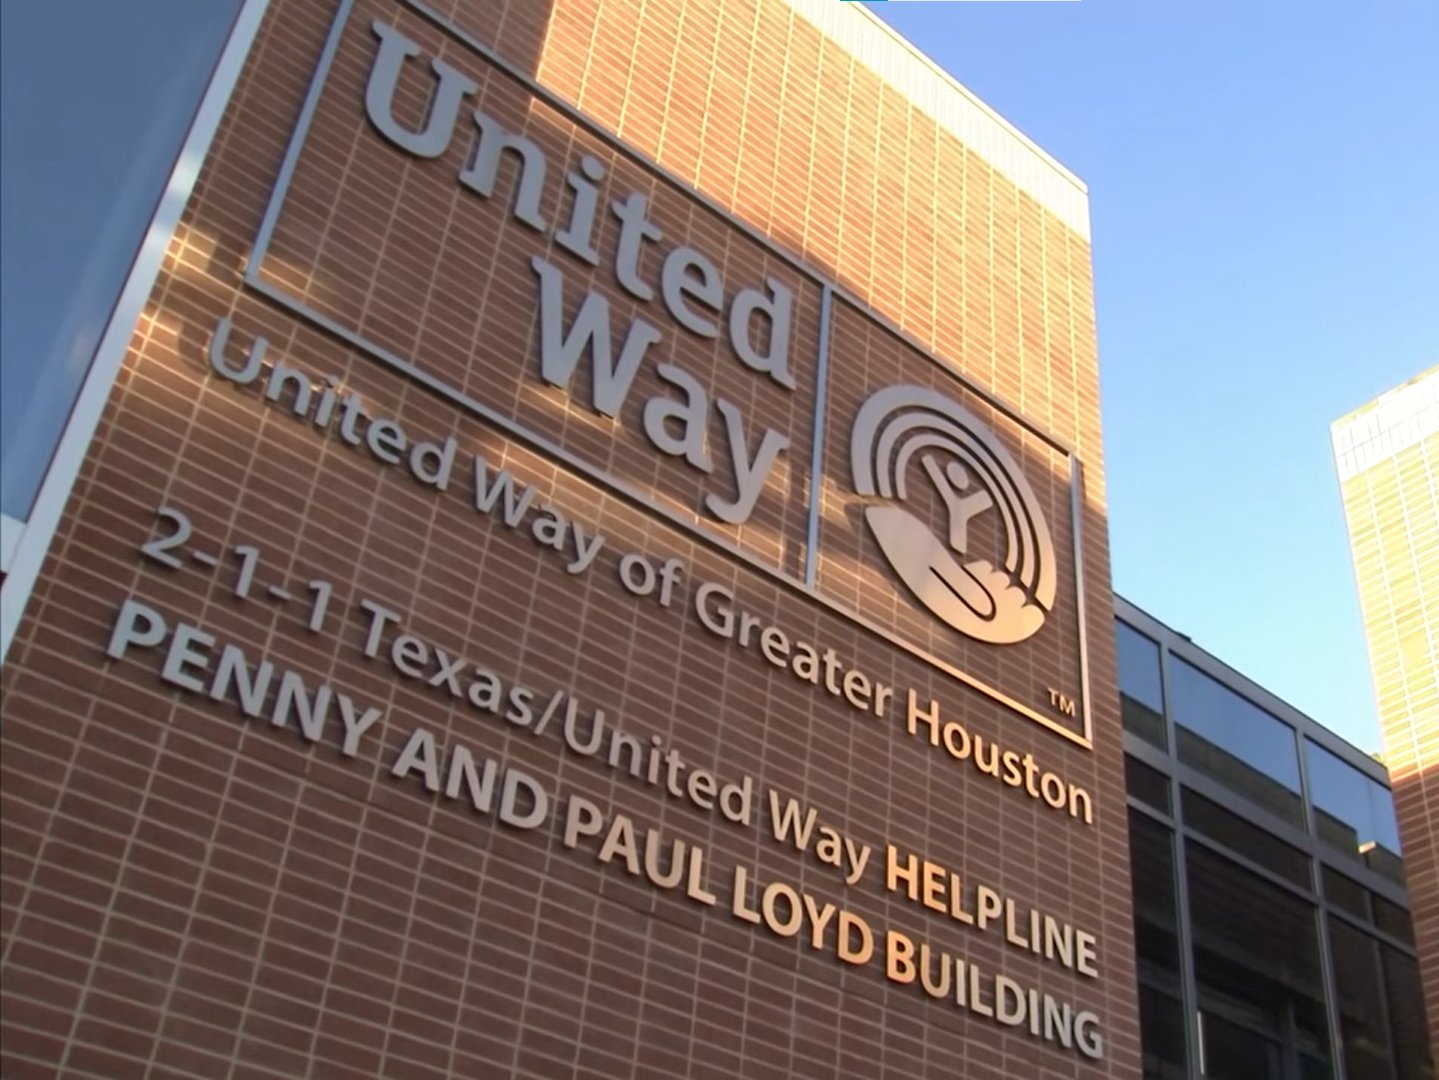 United Way of Greater Houston Building